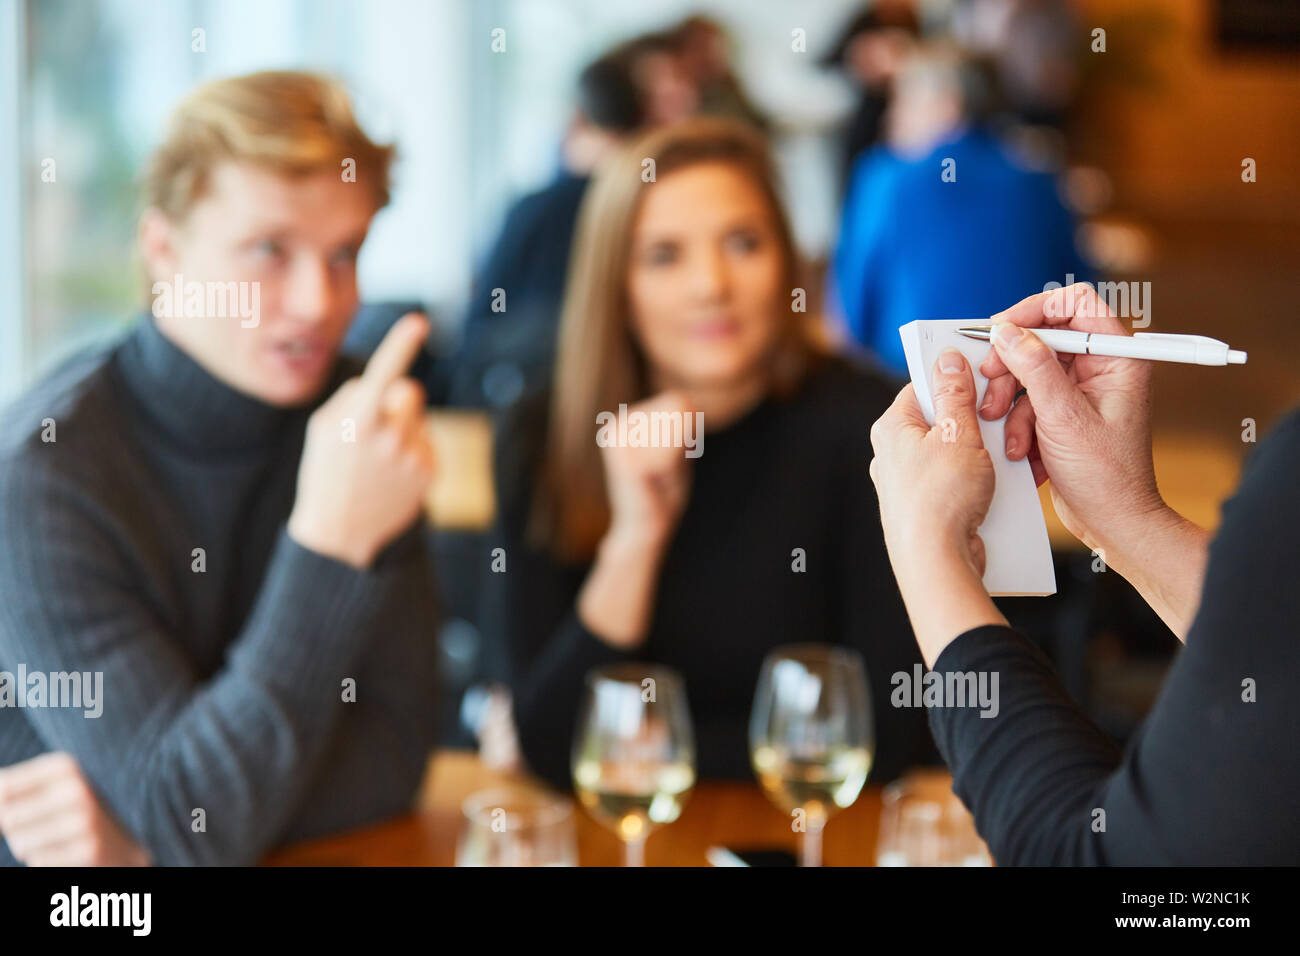 Service staff or waiter notes order from guests in the bistro or restaurant Stock Photo